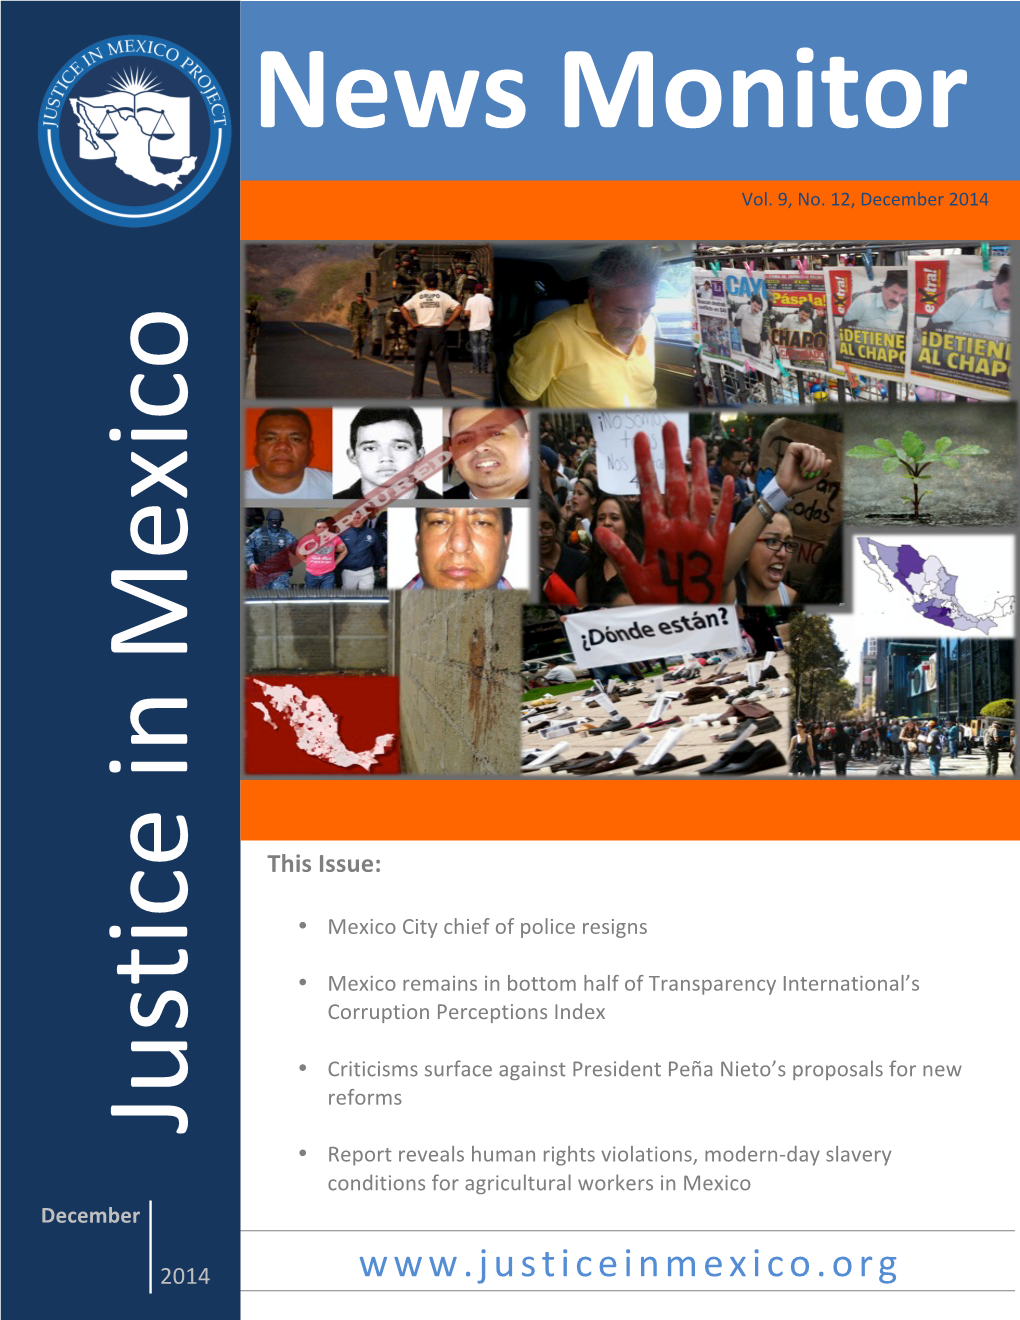 Justice in Mexico News Monitors in 2014